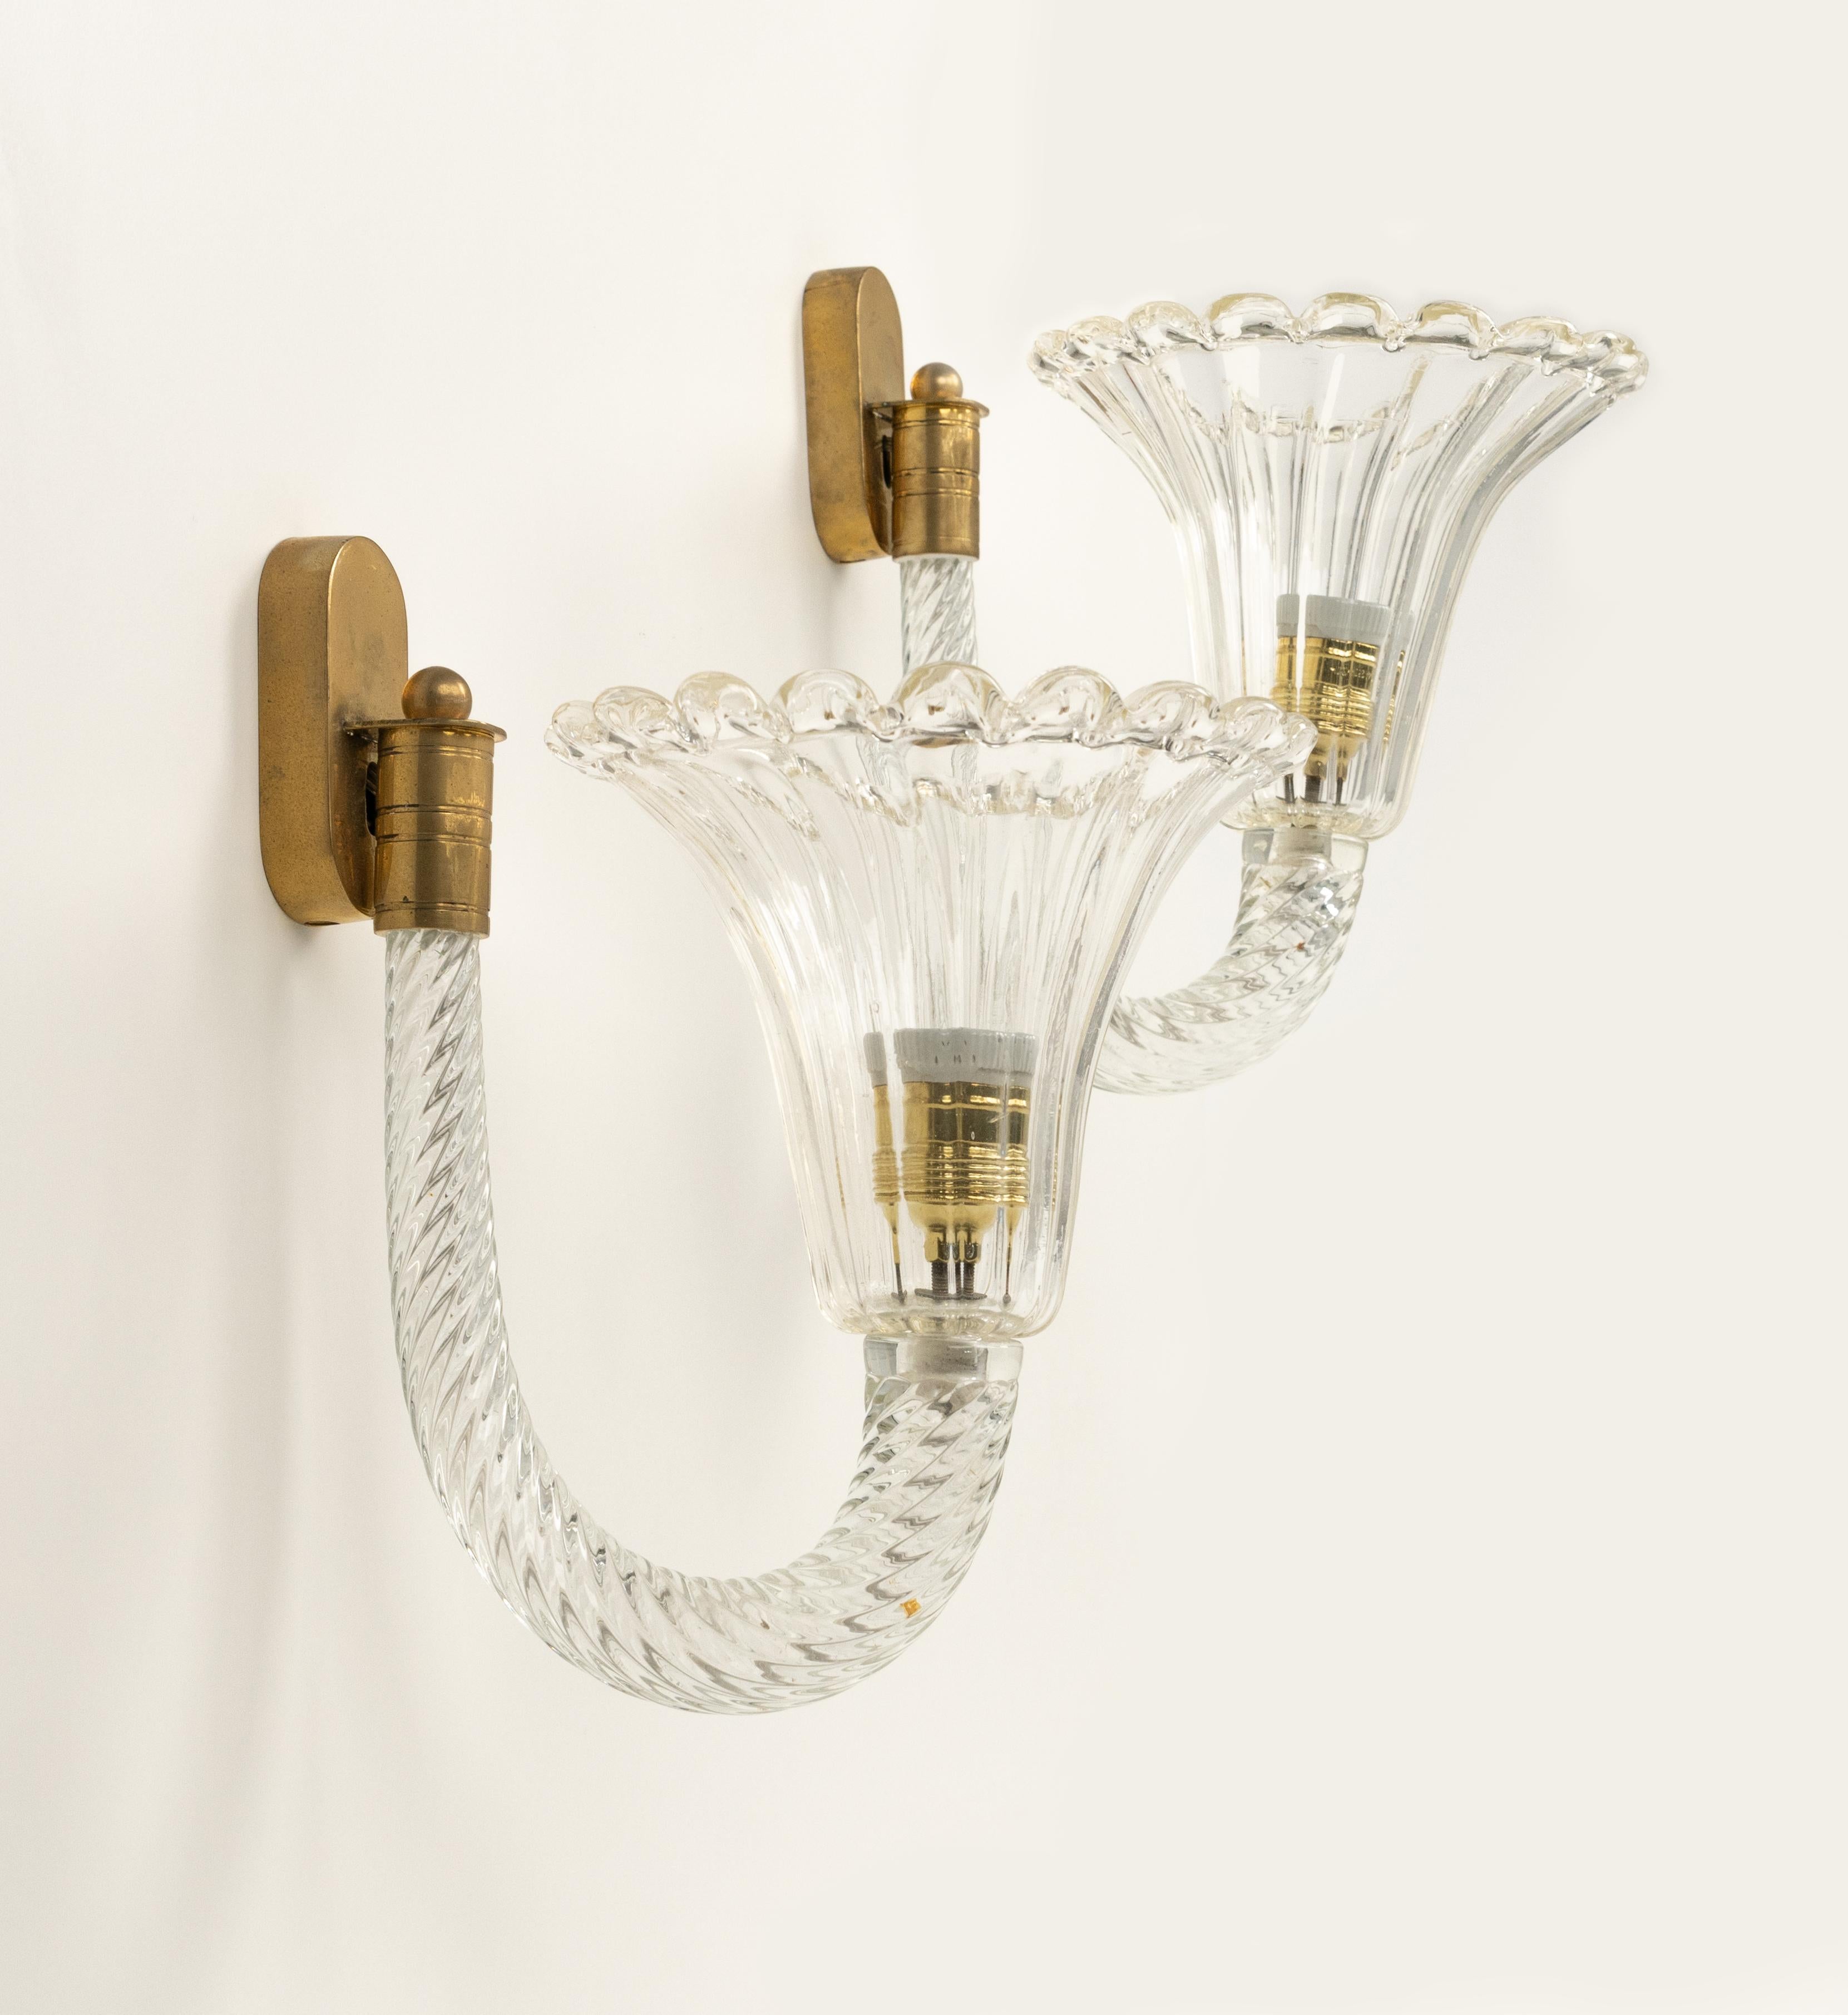 Mid-20th Century Pair of Sconces Murano Glass & Brass Barovier & Toso Style, Italy 1950s For Sale